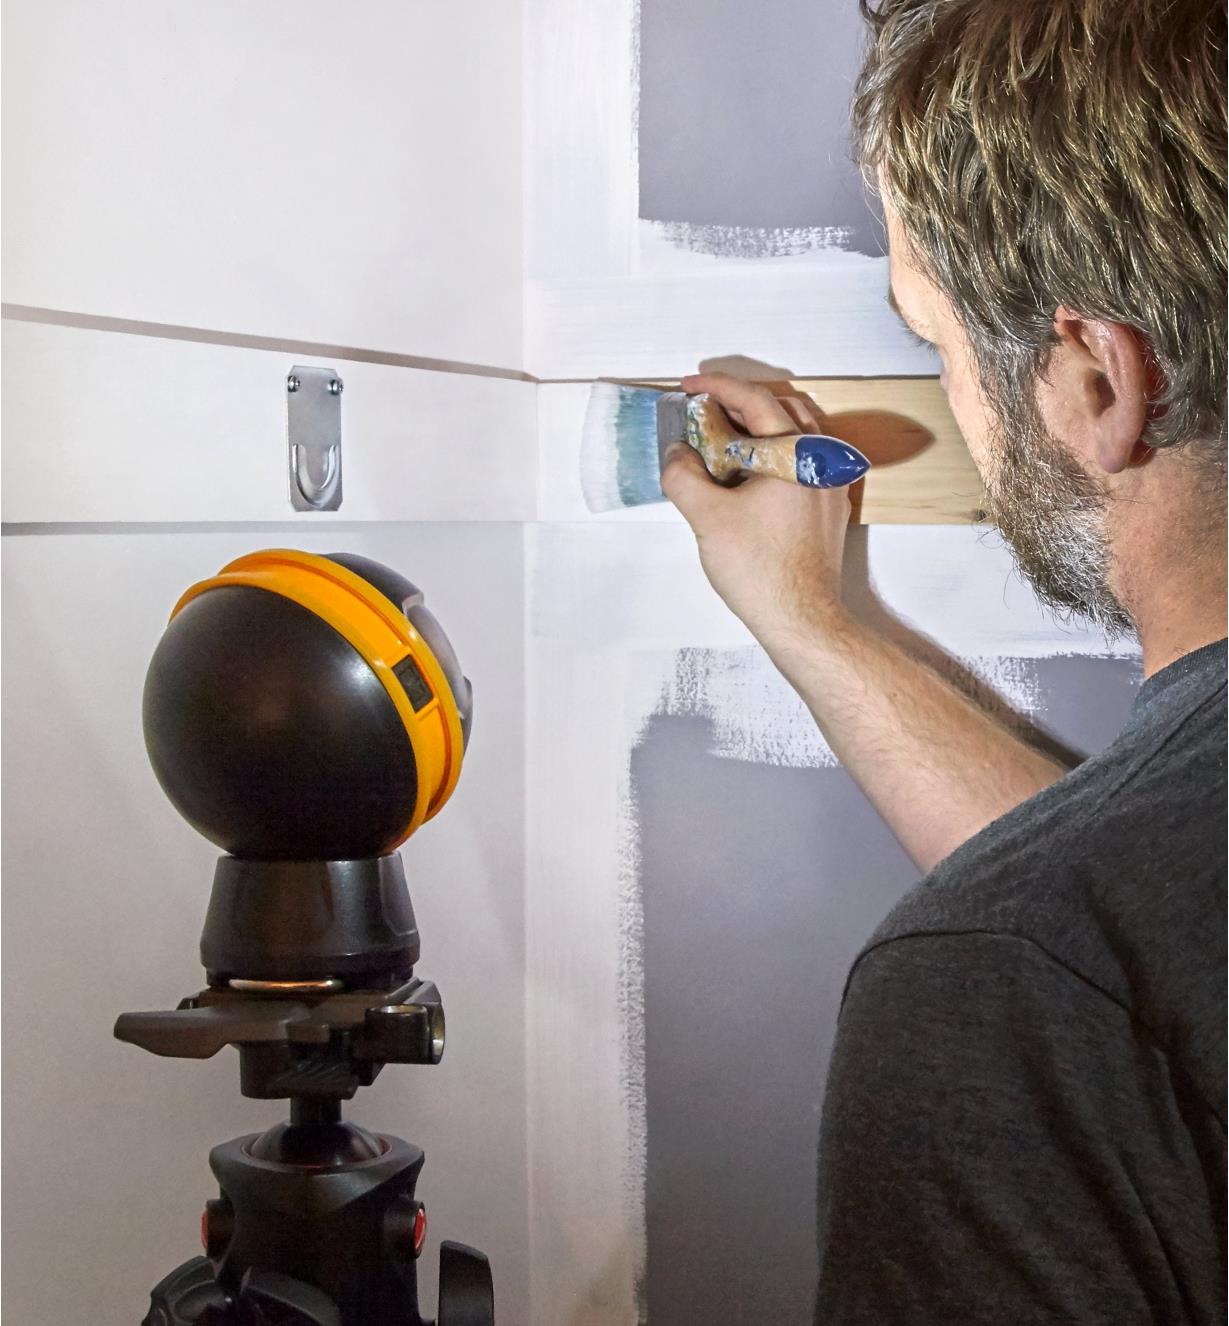 A rechargeable orb light mounted on a tripod to illuminate inside a closet that is being painted